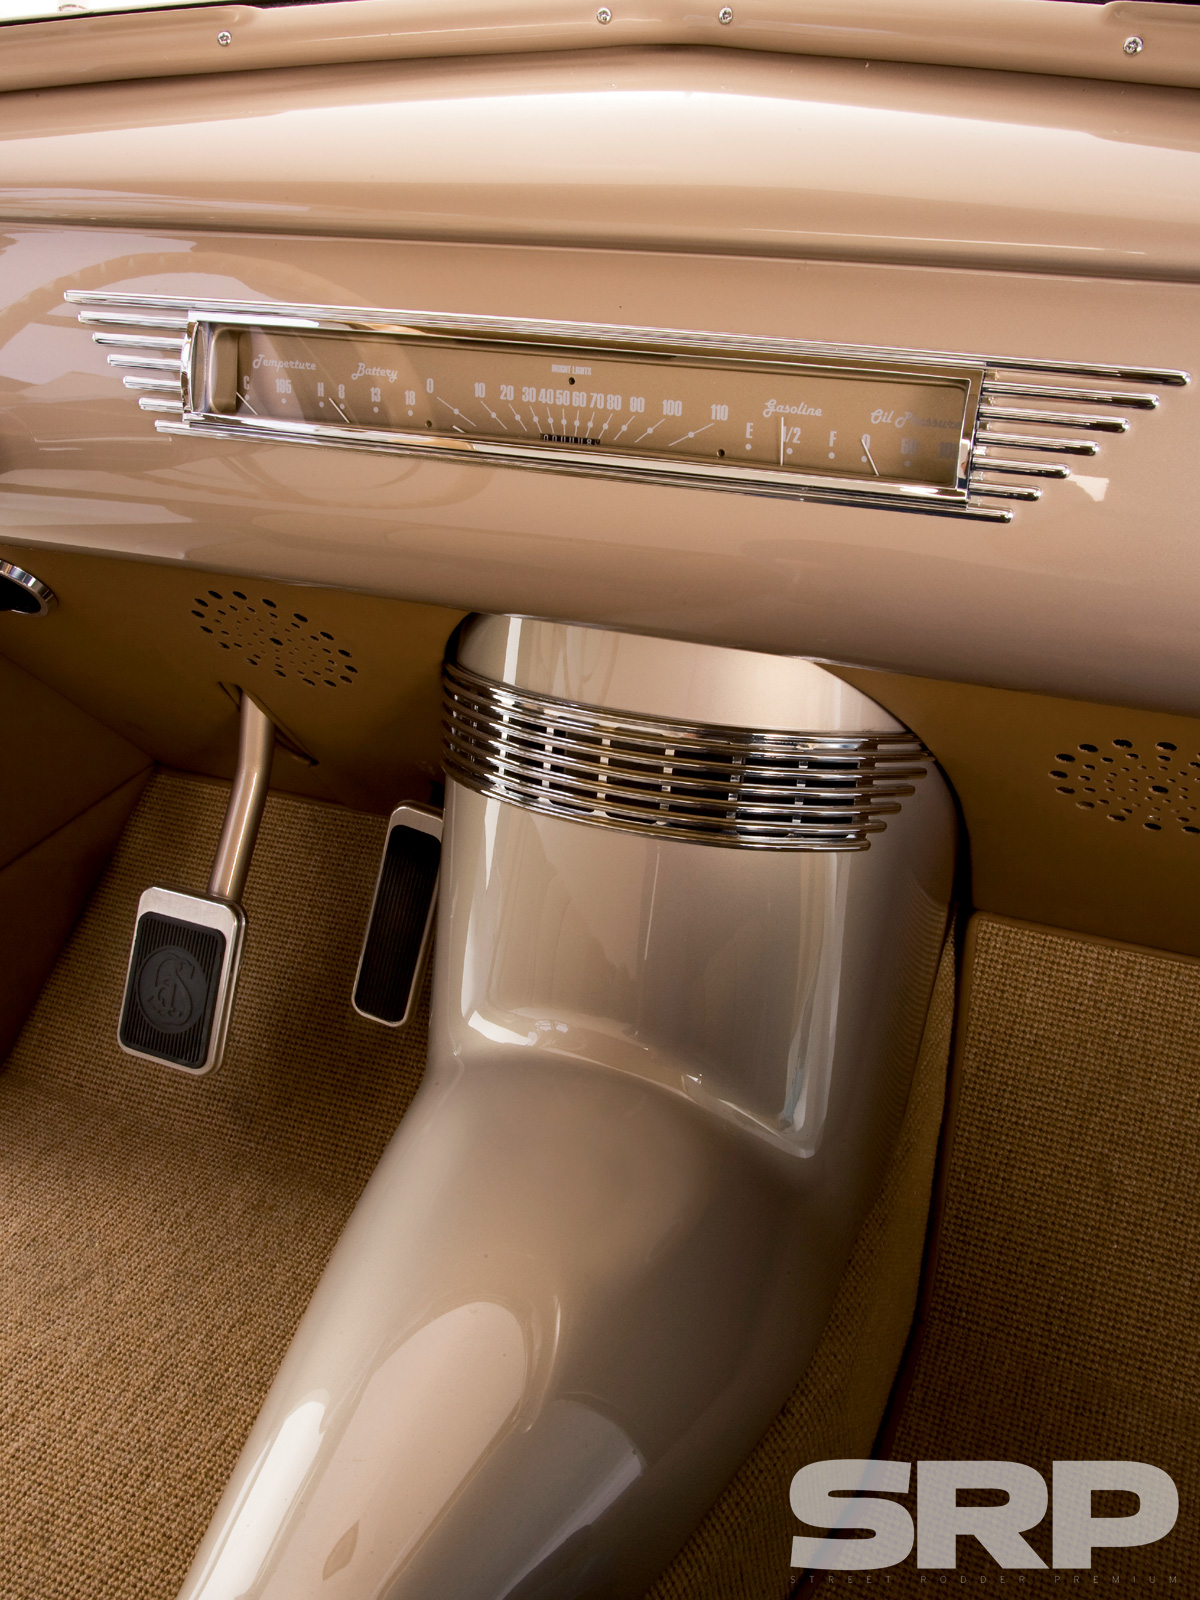 Nice Images Collection: 1939 Cadillac Lasalle Desktop Wallpapers